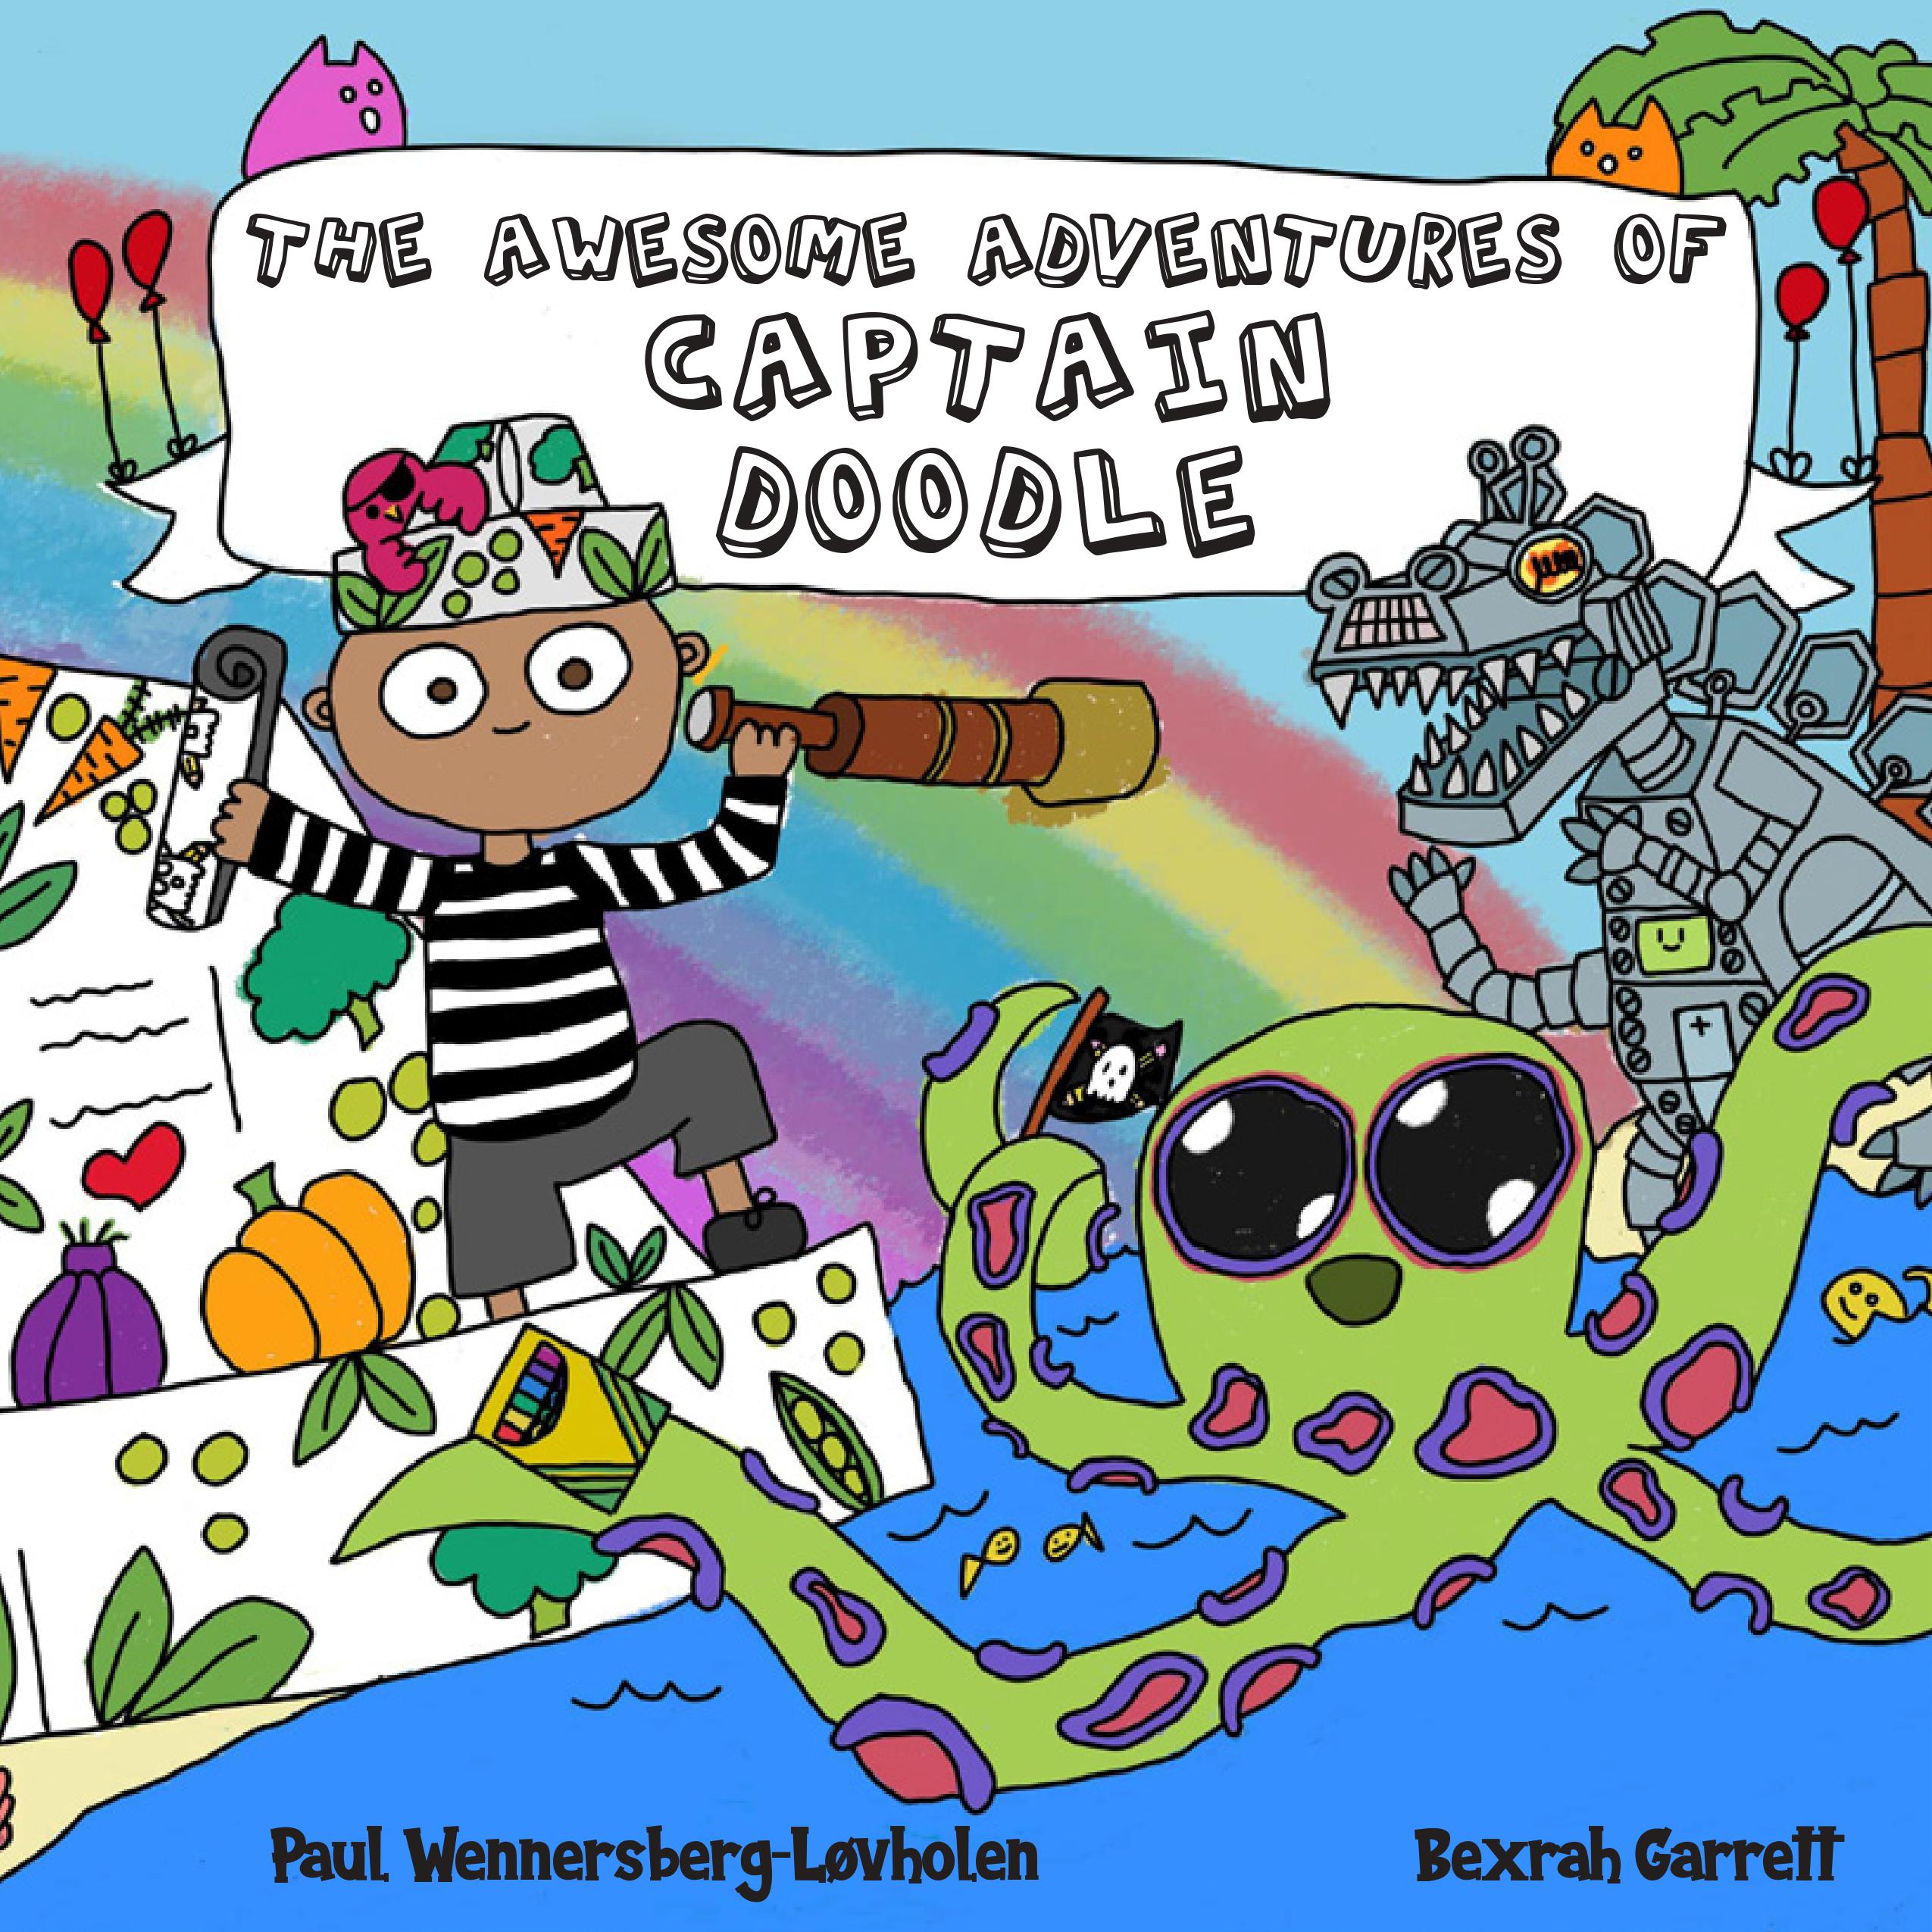 FREE: The Awesome Adventures of Captain Doodle by Paul Wennersberg-Løvholen